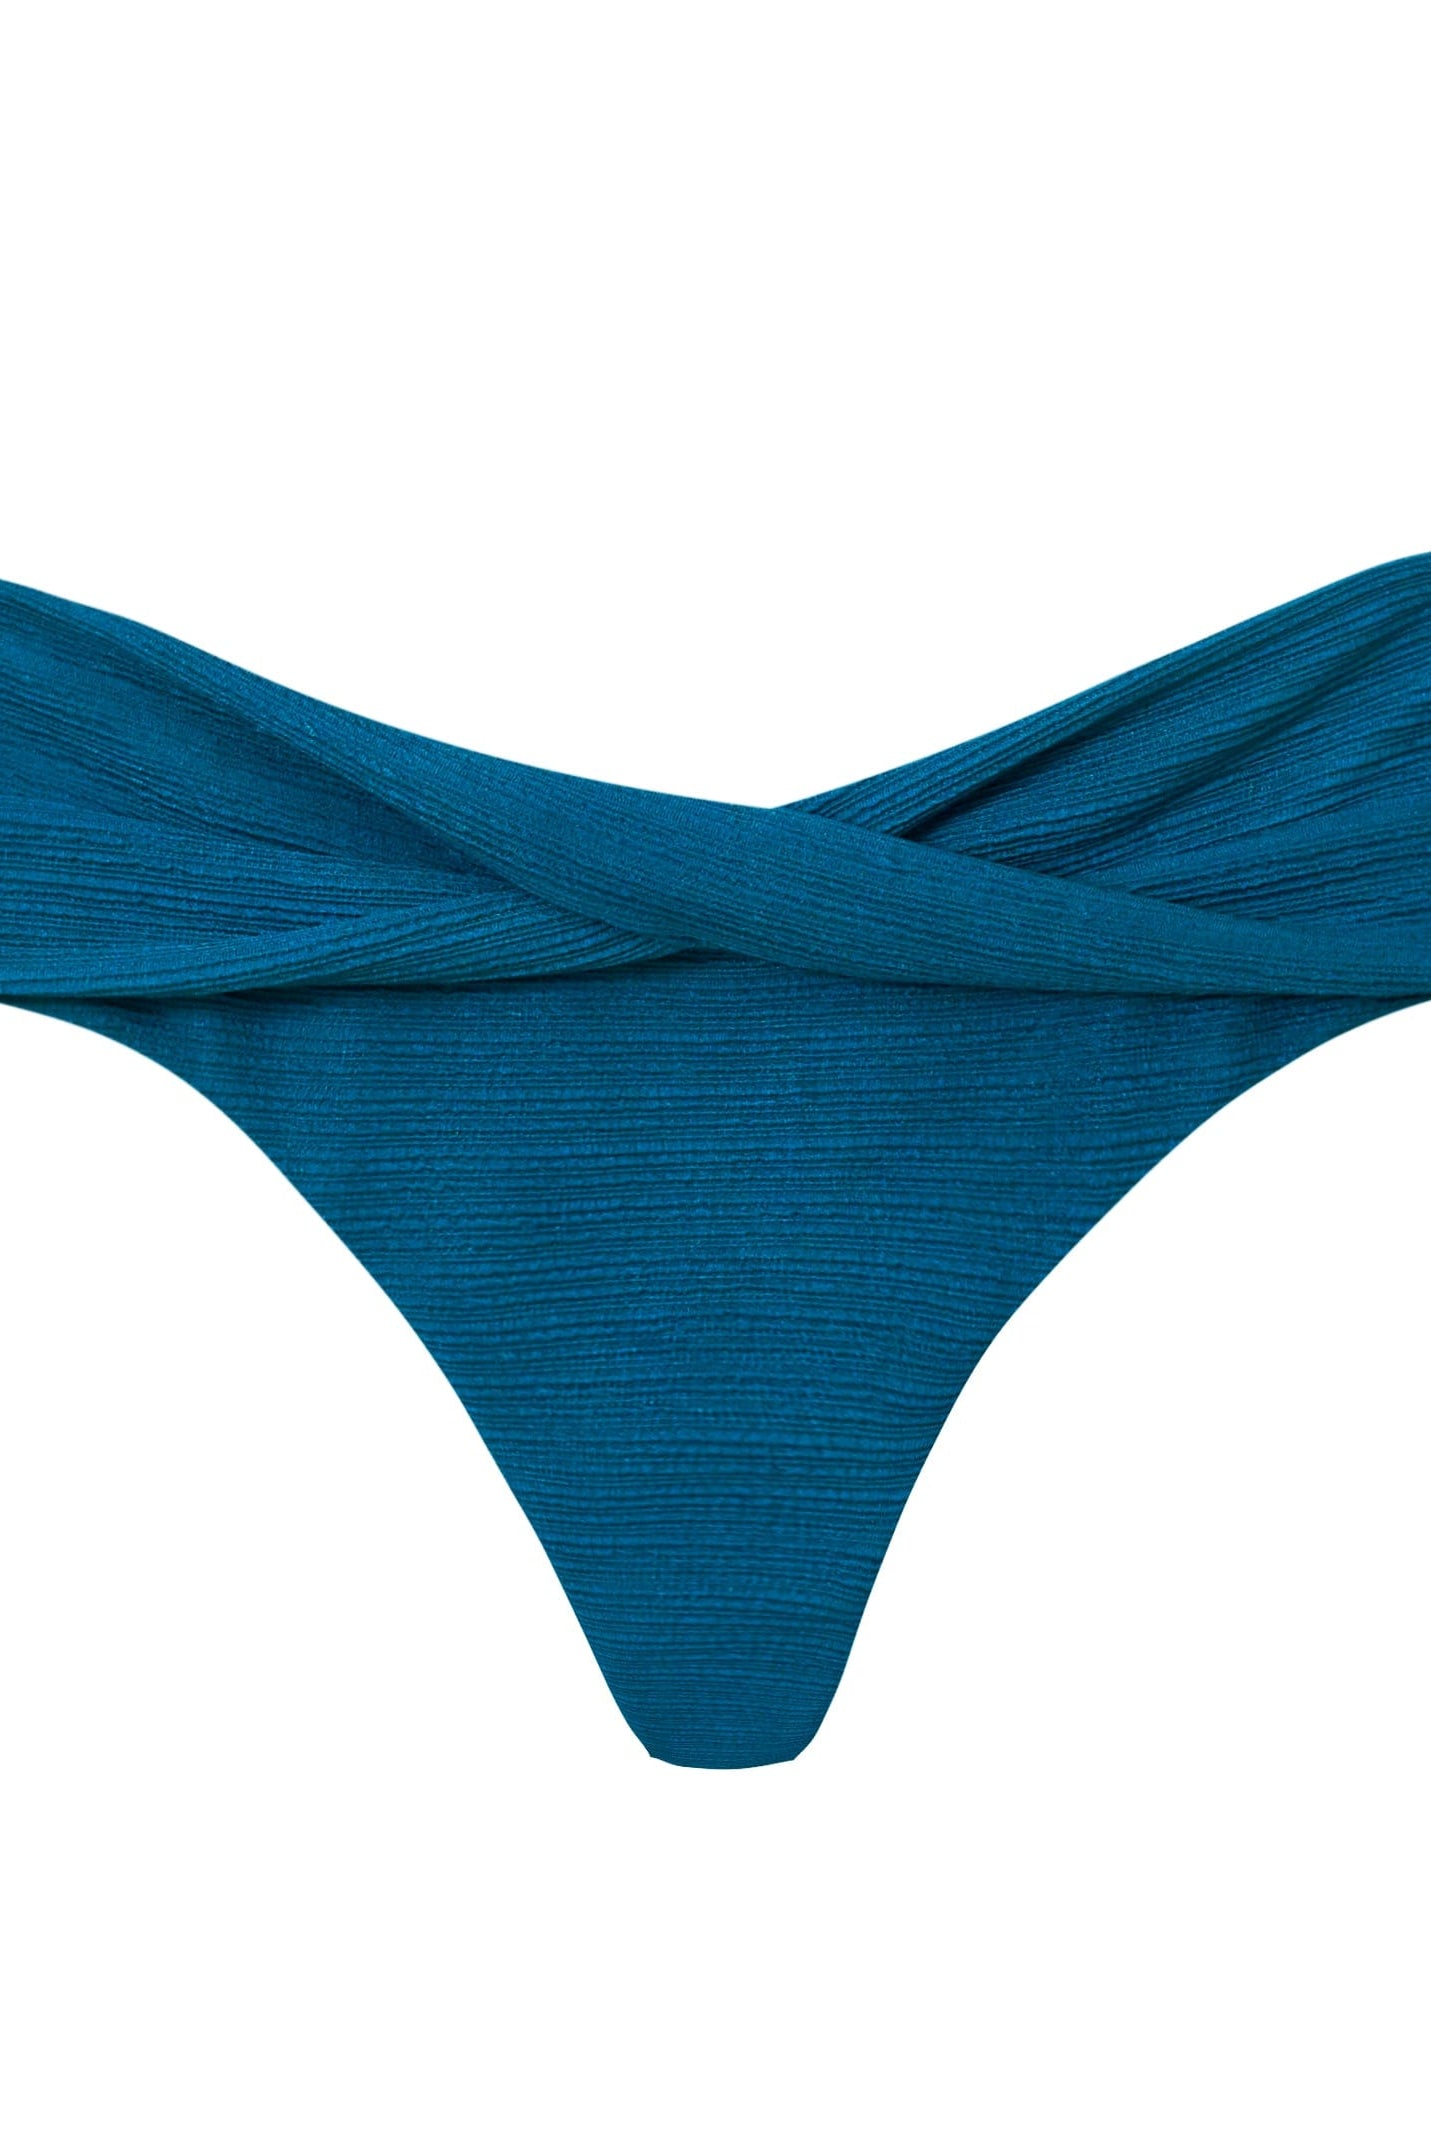 A textured turquoise bikini bottom with crisscross front detail. Featured against a white wall background.